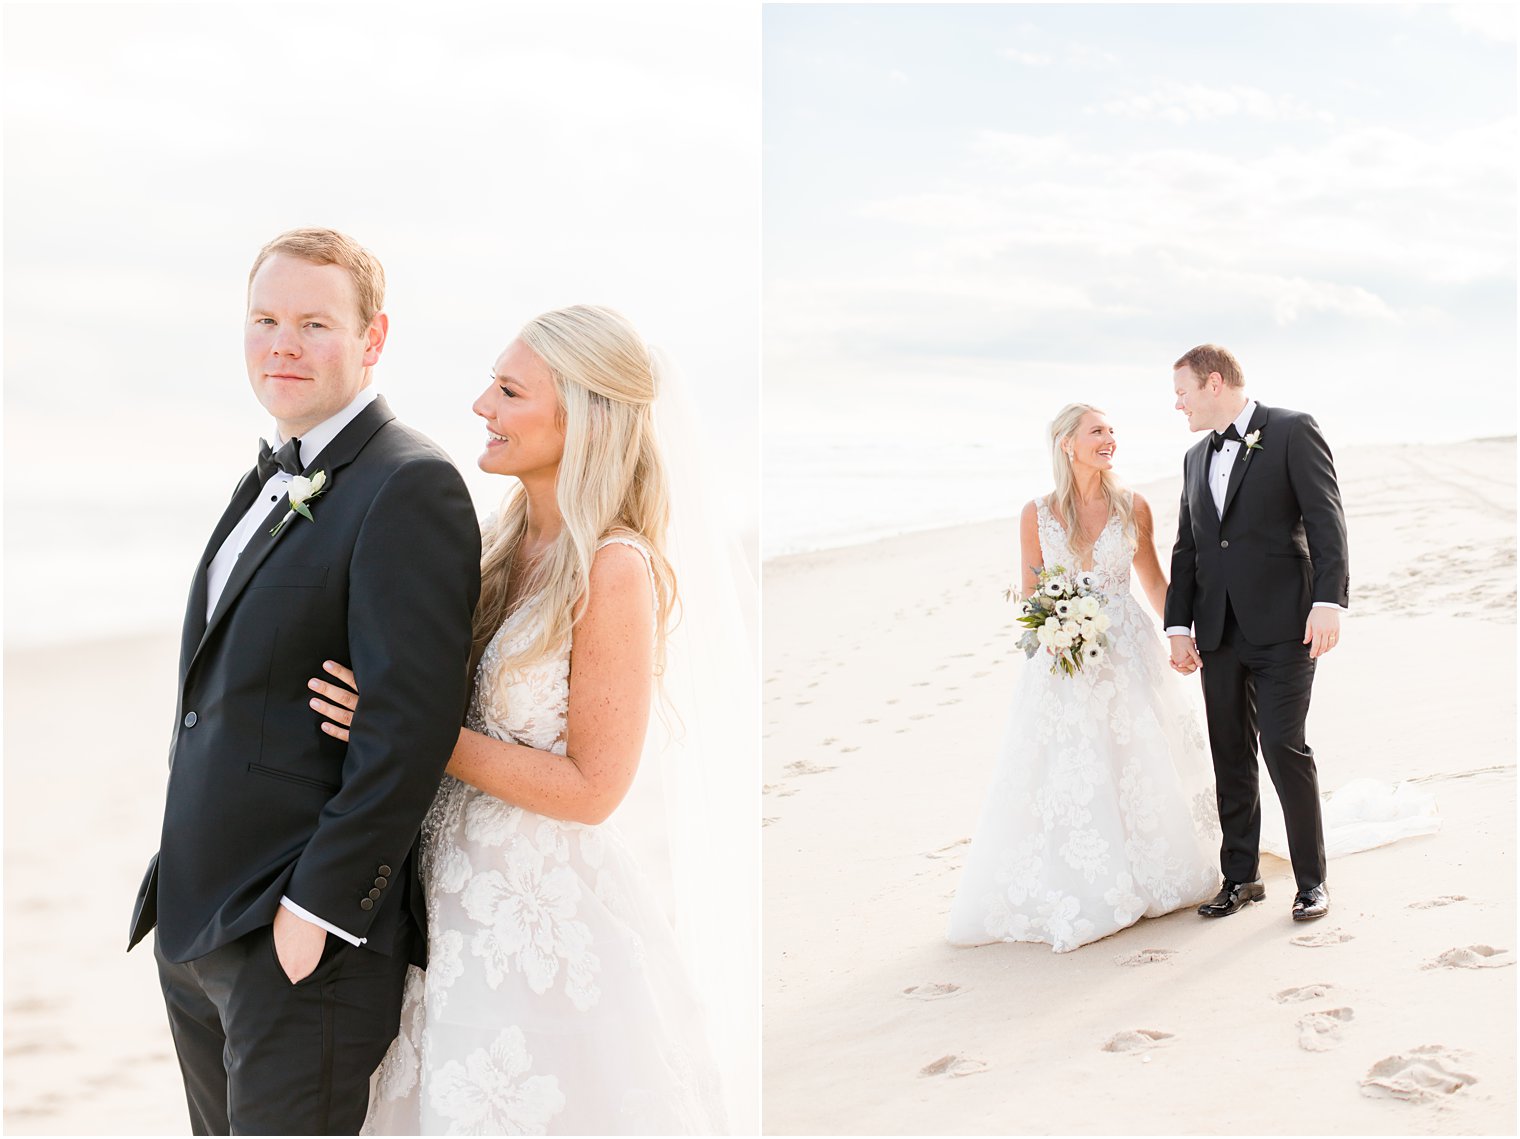 Brant Beach Yacht Club wedding day portraits of bride and groom on the sand 